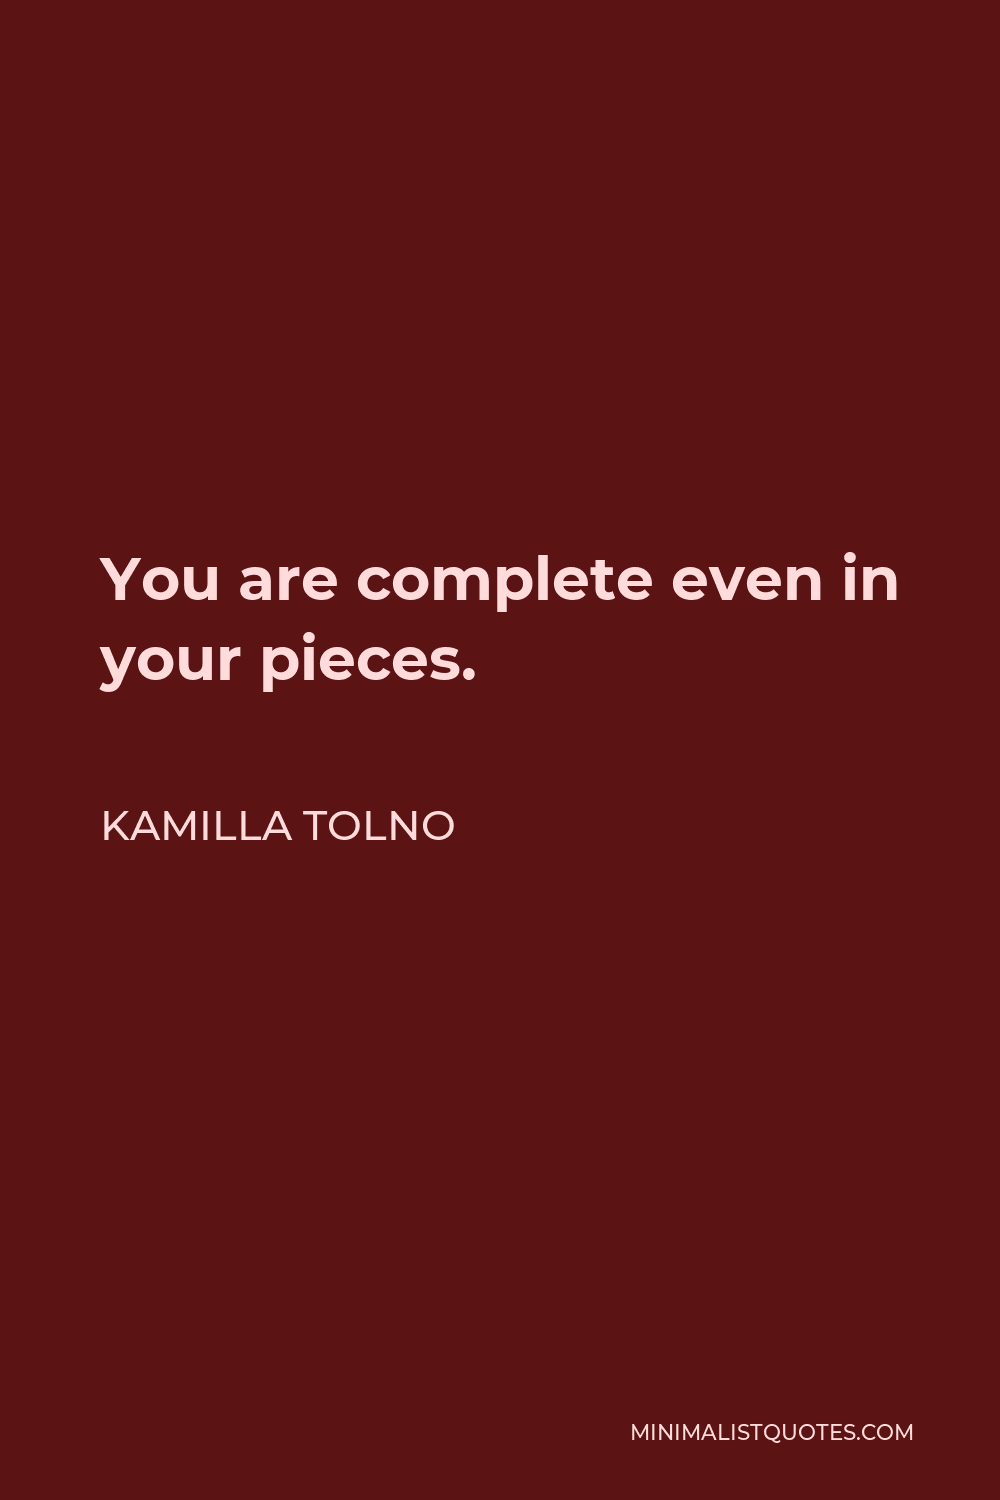 Kamilla Tolno Quote - You are complete even in your pieces.